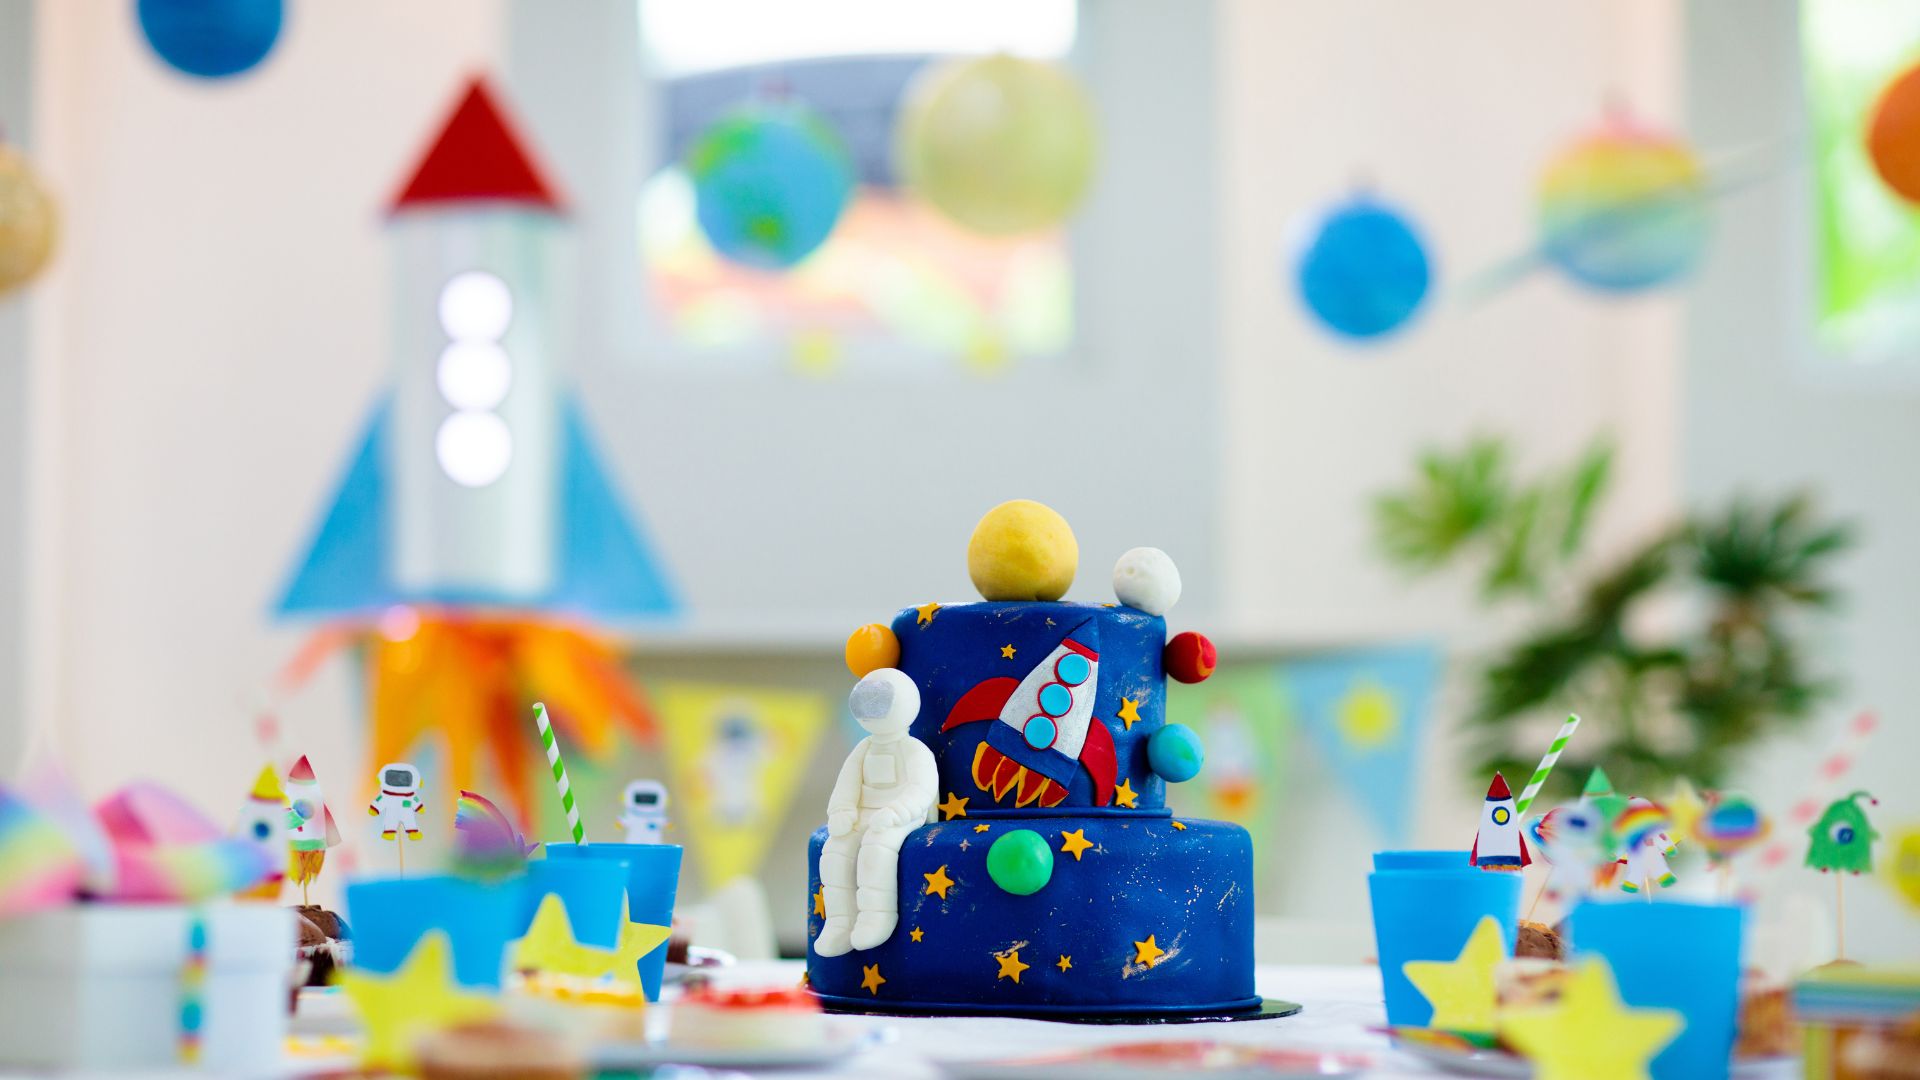 Space themed birthday party